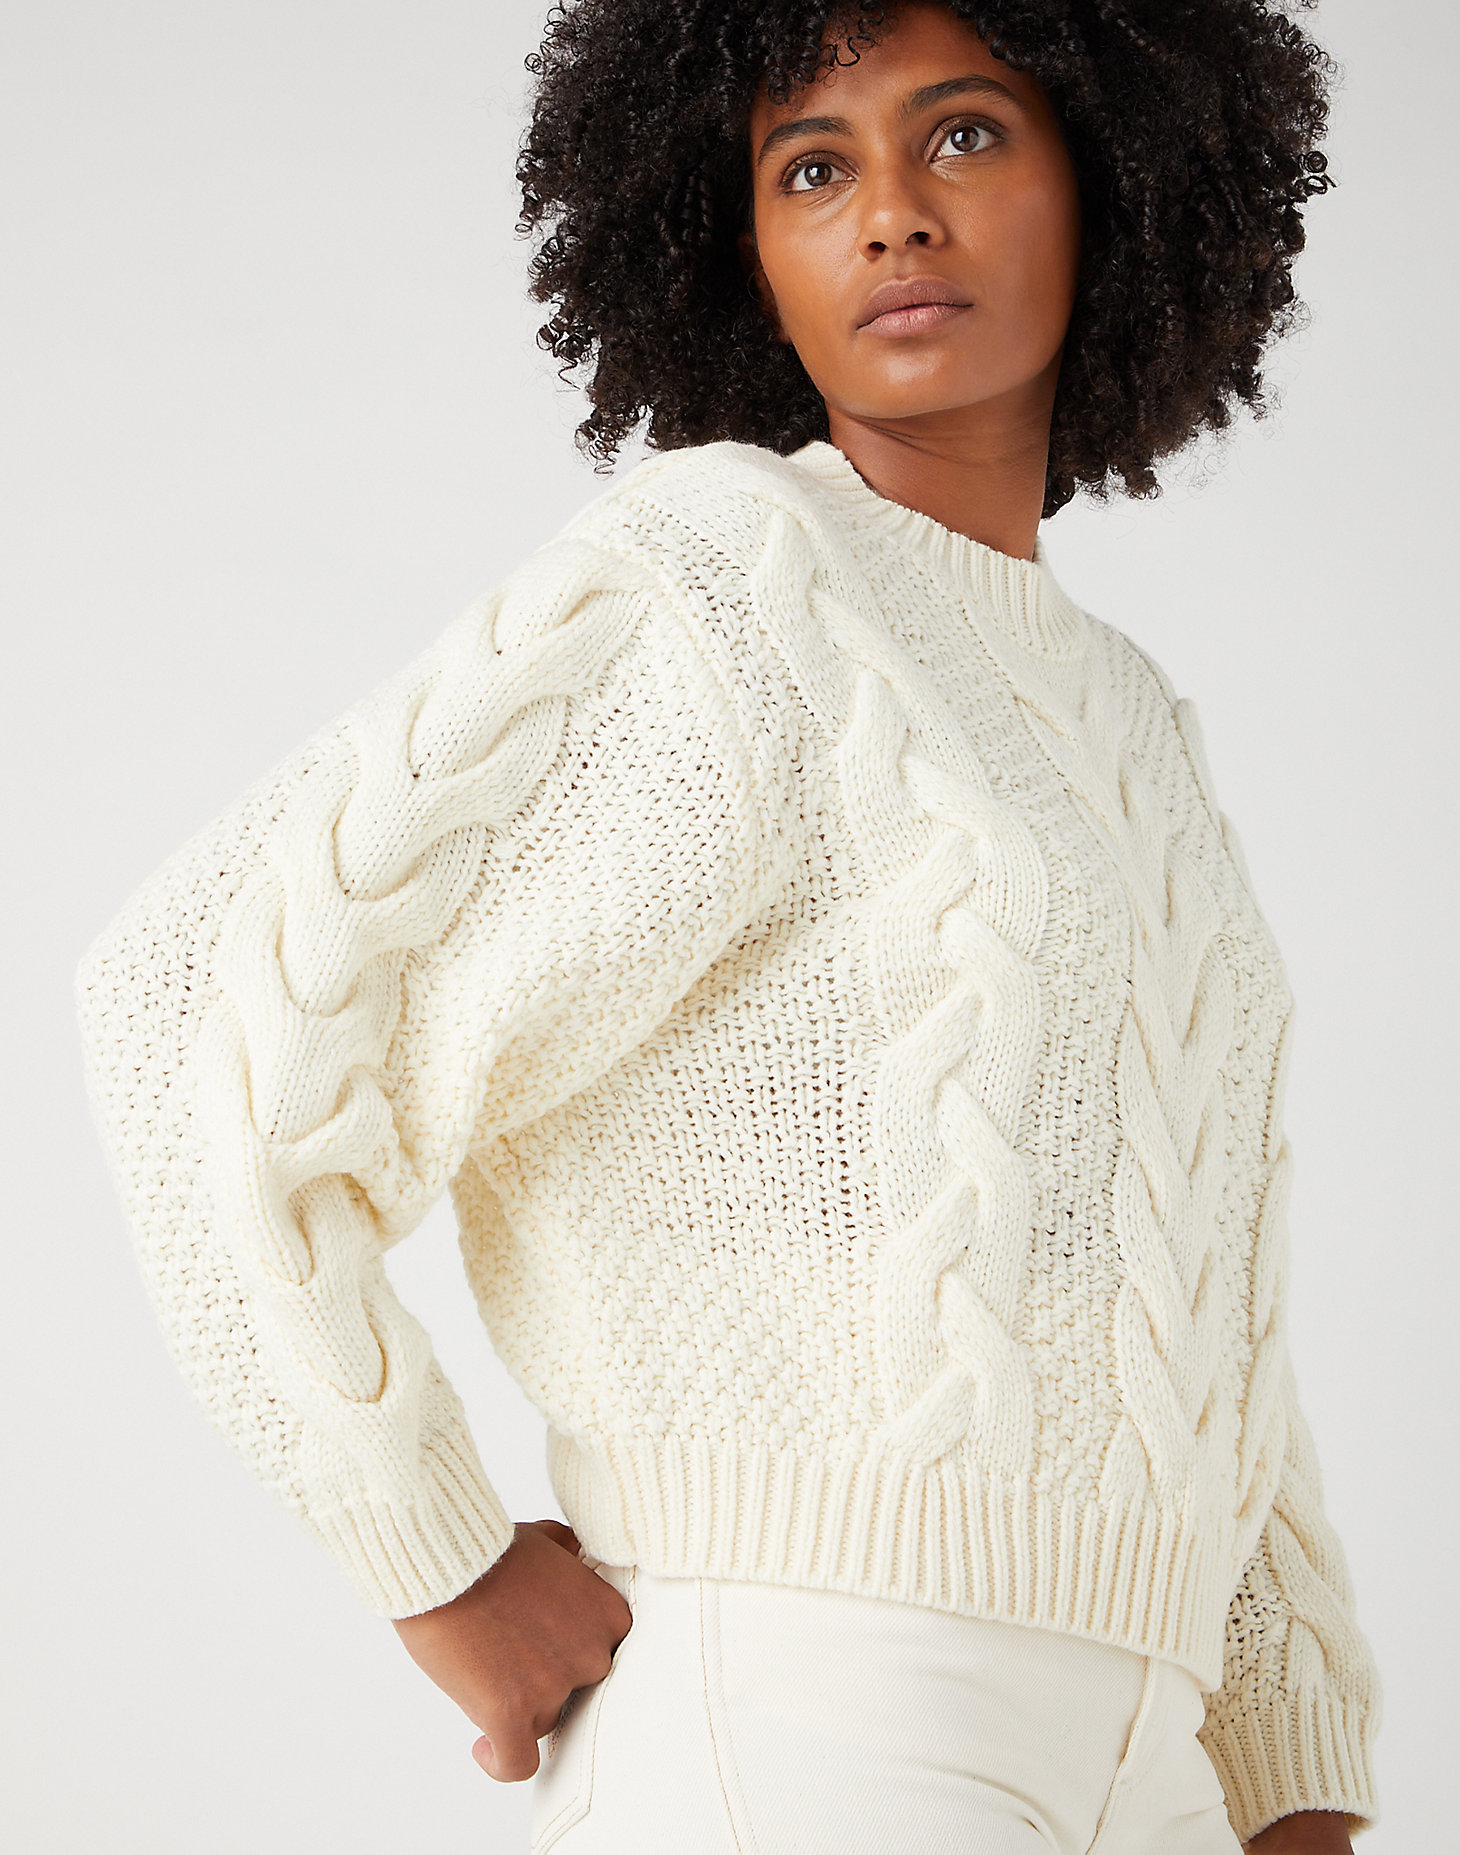 Crew Neck Cable Knit in Worn White alternative view 5